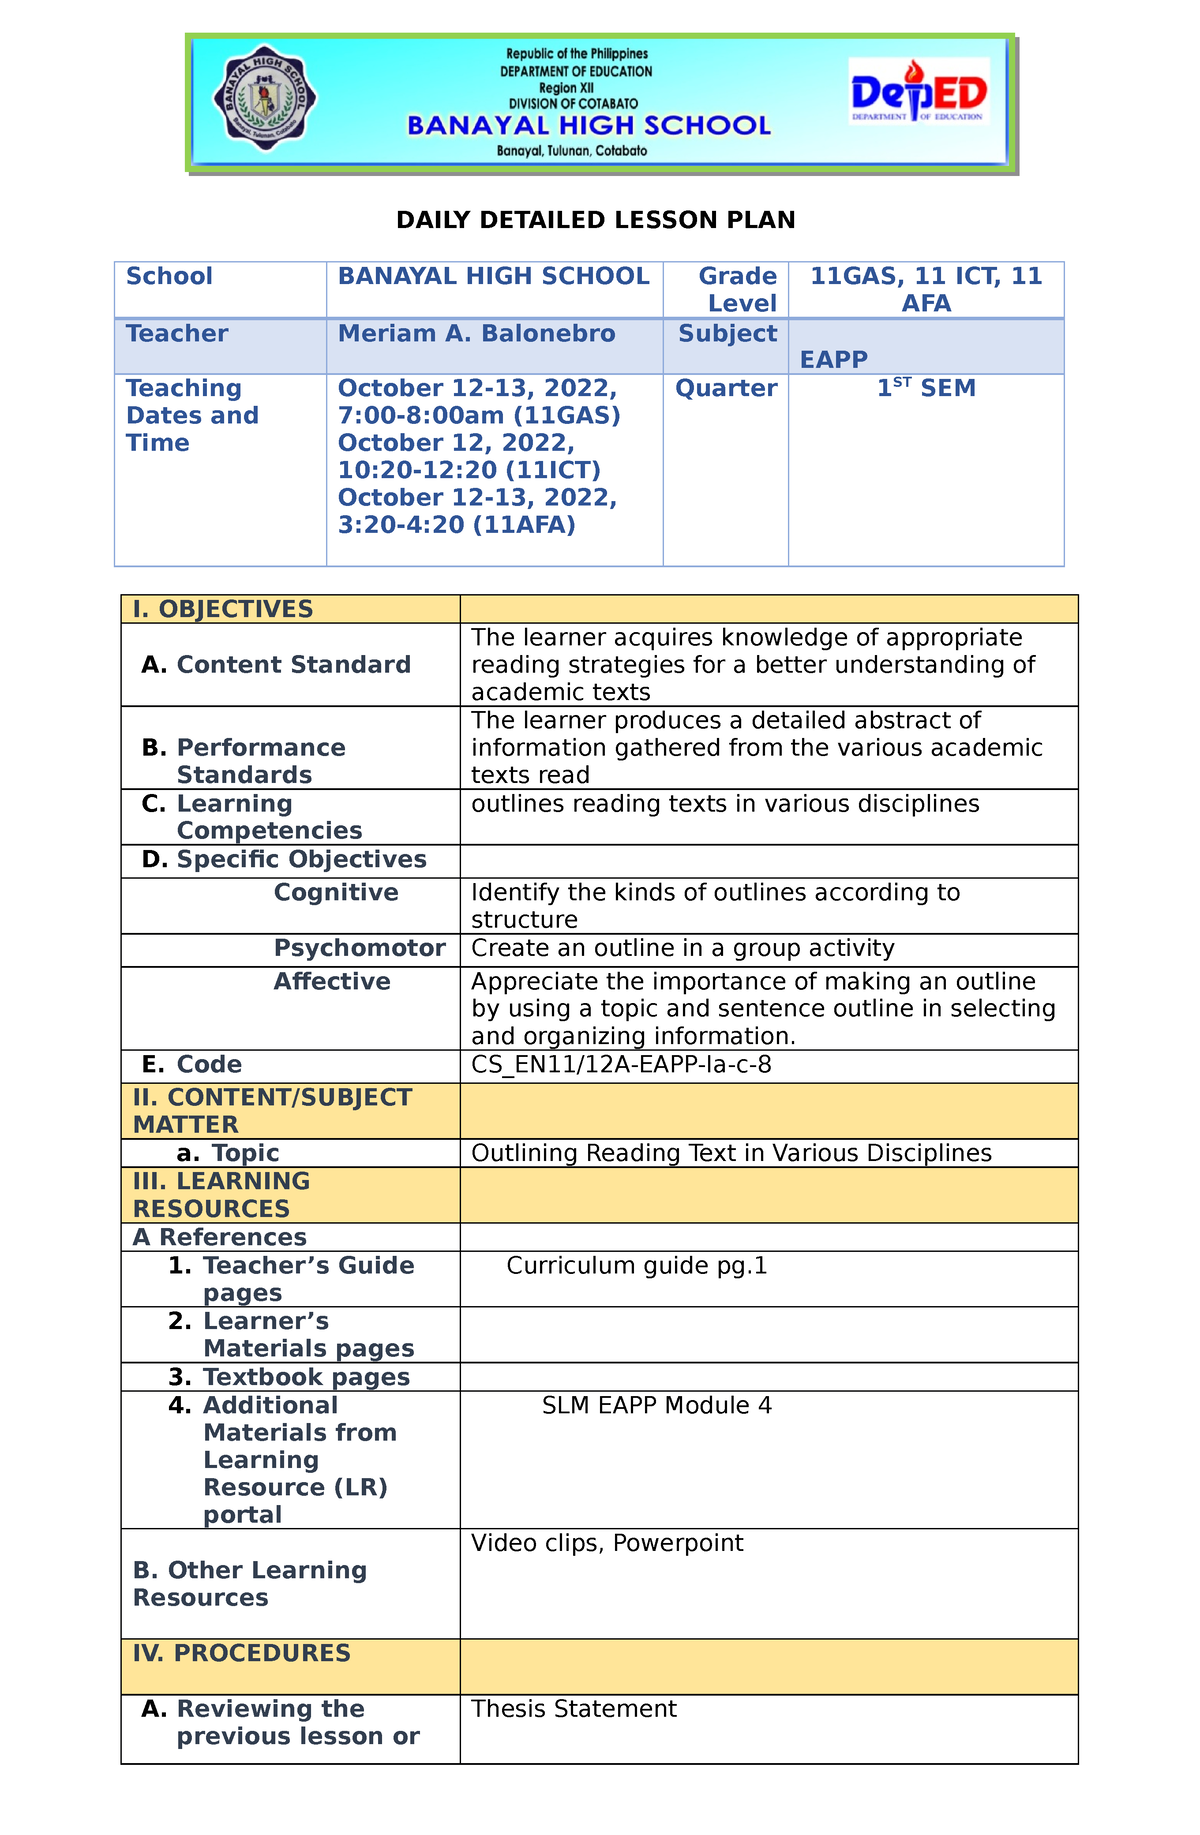 LP Outlining - Lesson plan for EAPP for grade 11 Students. - DAILY DETAILED LESSON PLAN School